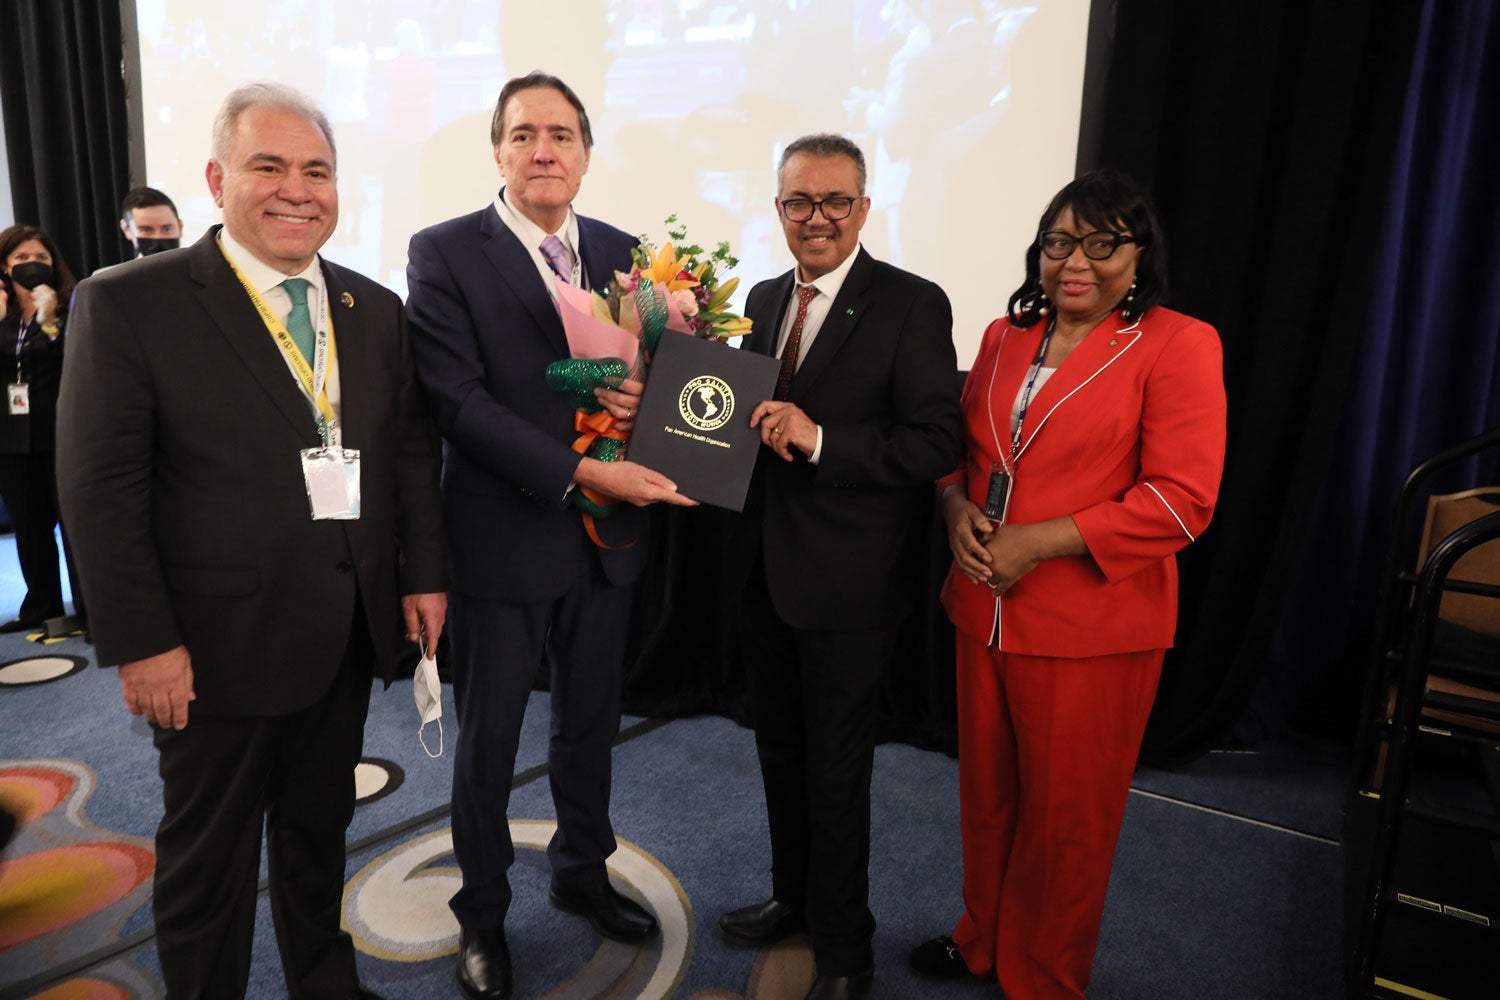 Minister of Health of Brazil,  Dr. Marcelo Queiroga, Dr. Jarbas Barbosa, Director elect of PAHO, Dr. Carissa F. Etienne, PAHO Director, and Dr. Tedros, Director General of WHO.